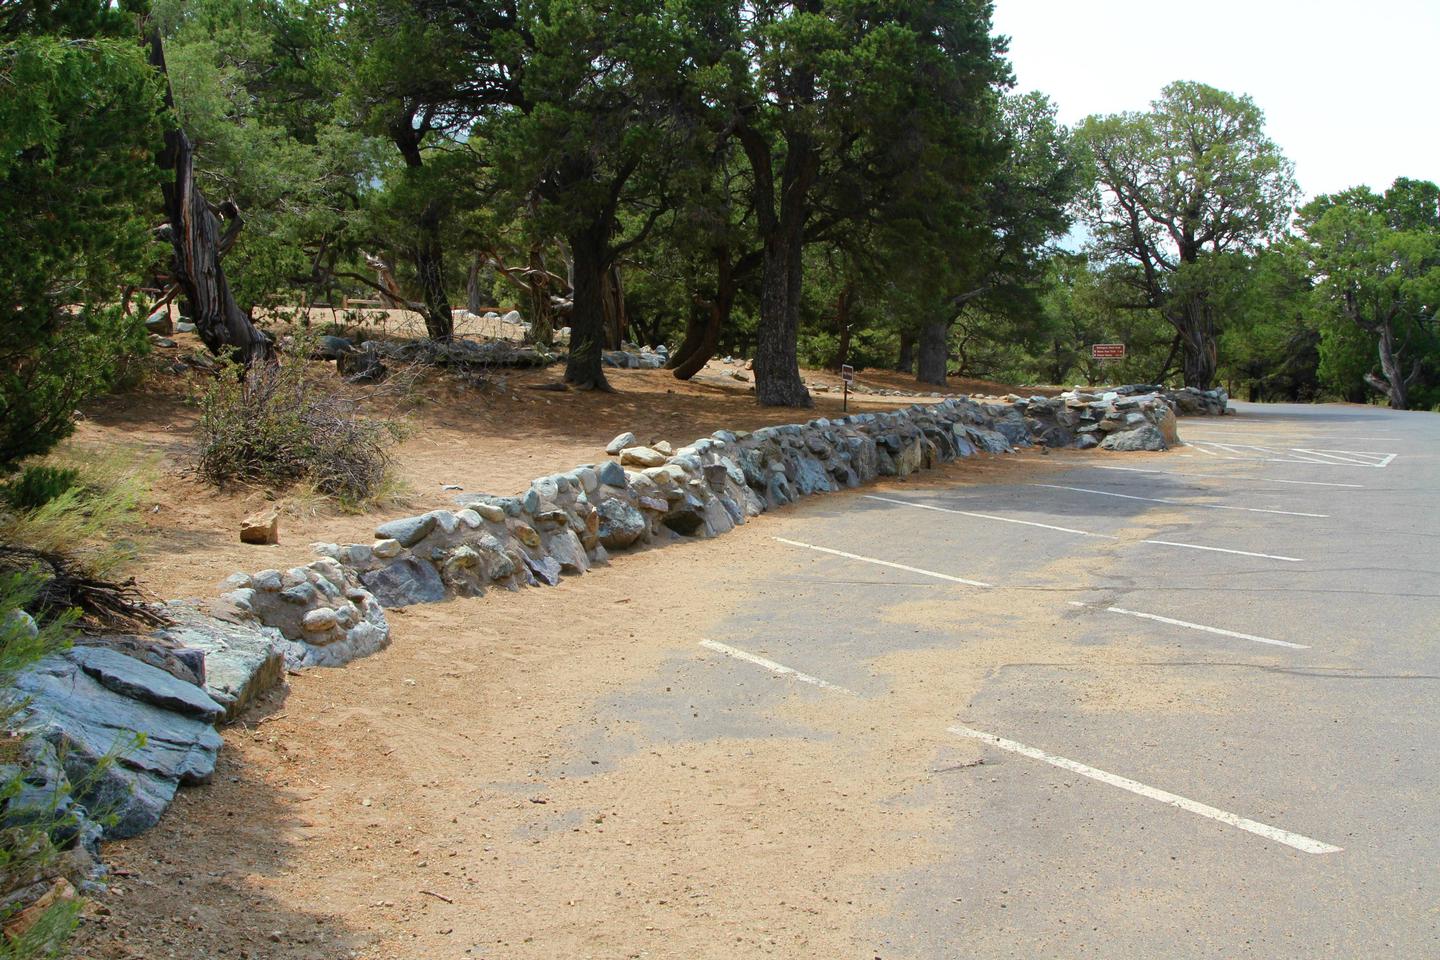 View of Group Site "A" parking area. There is room for several cars. Utility trailers are allowed in parking spaces, but not campers or recreational trailers.Group Site A, Pinon Flats Campground